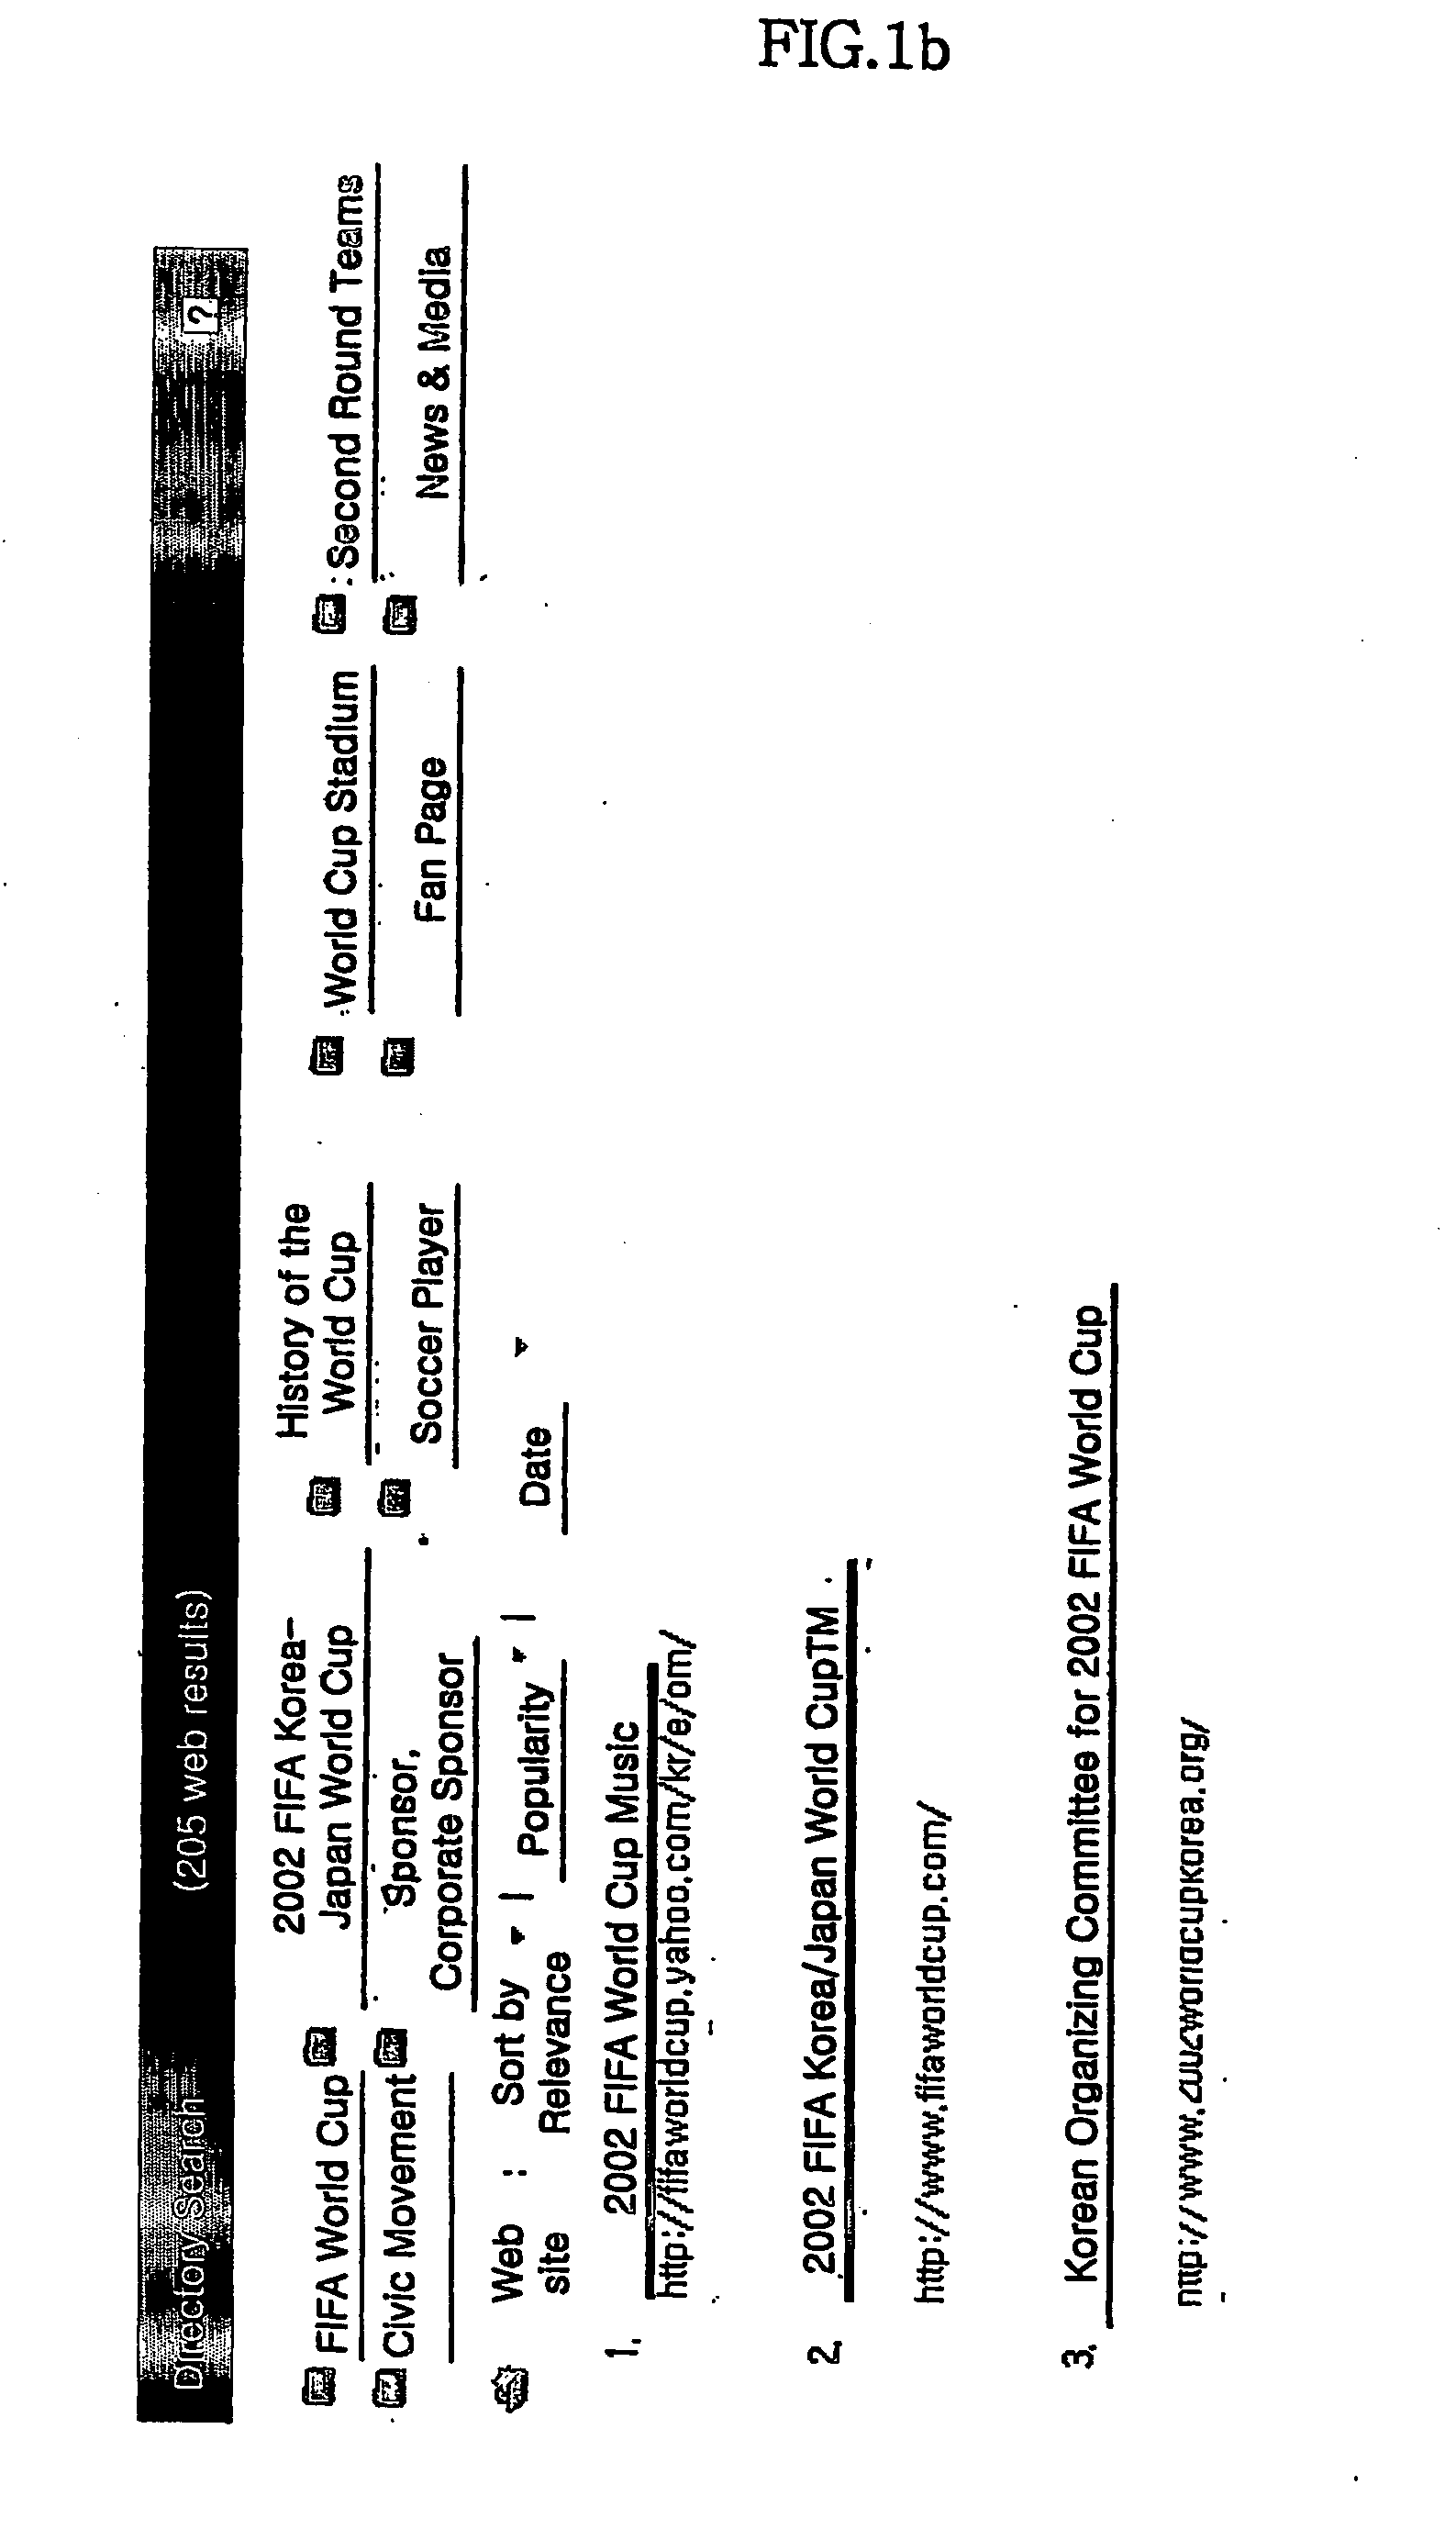 Method of managing web sites registered in search engine and a system thereof